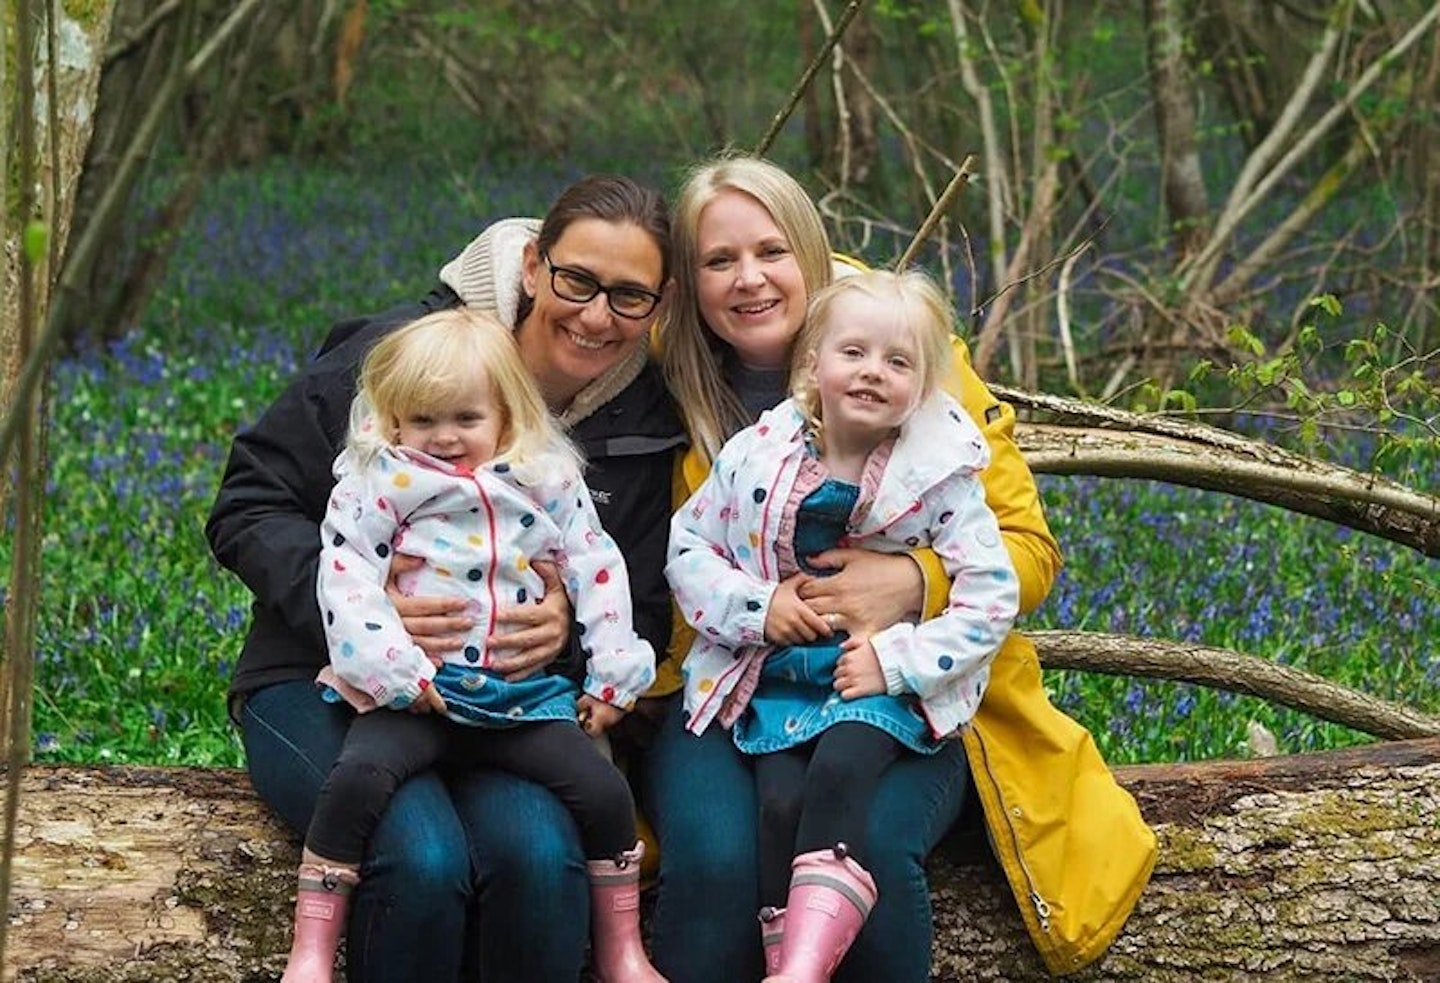 "During my second pregnancy I did everything I could to avoid another back-to-back birth"